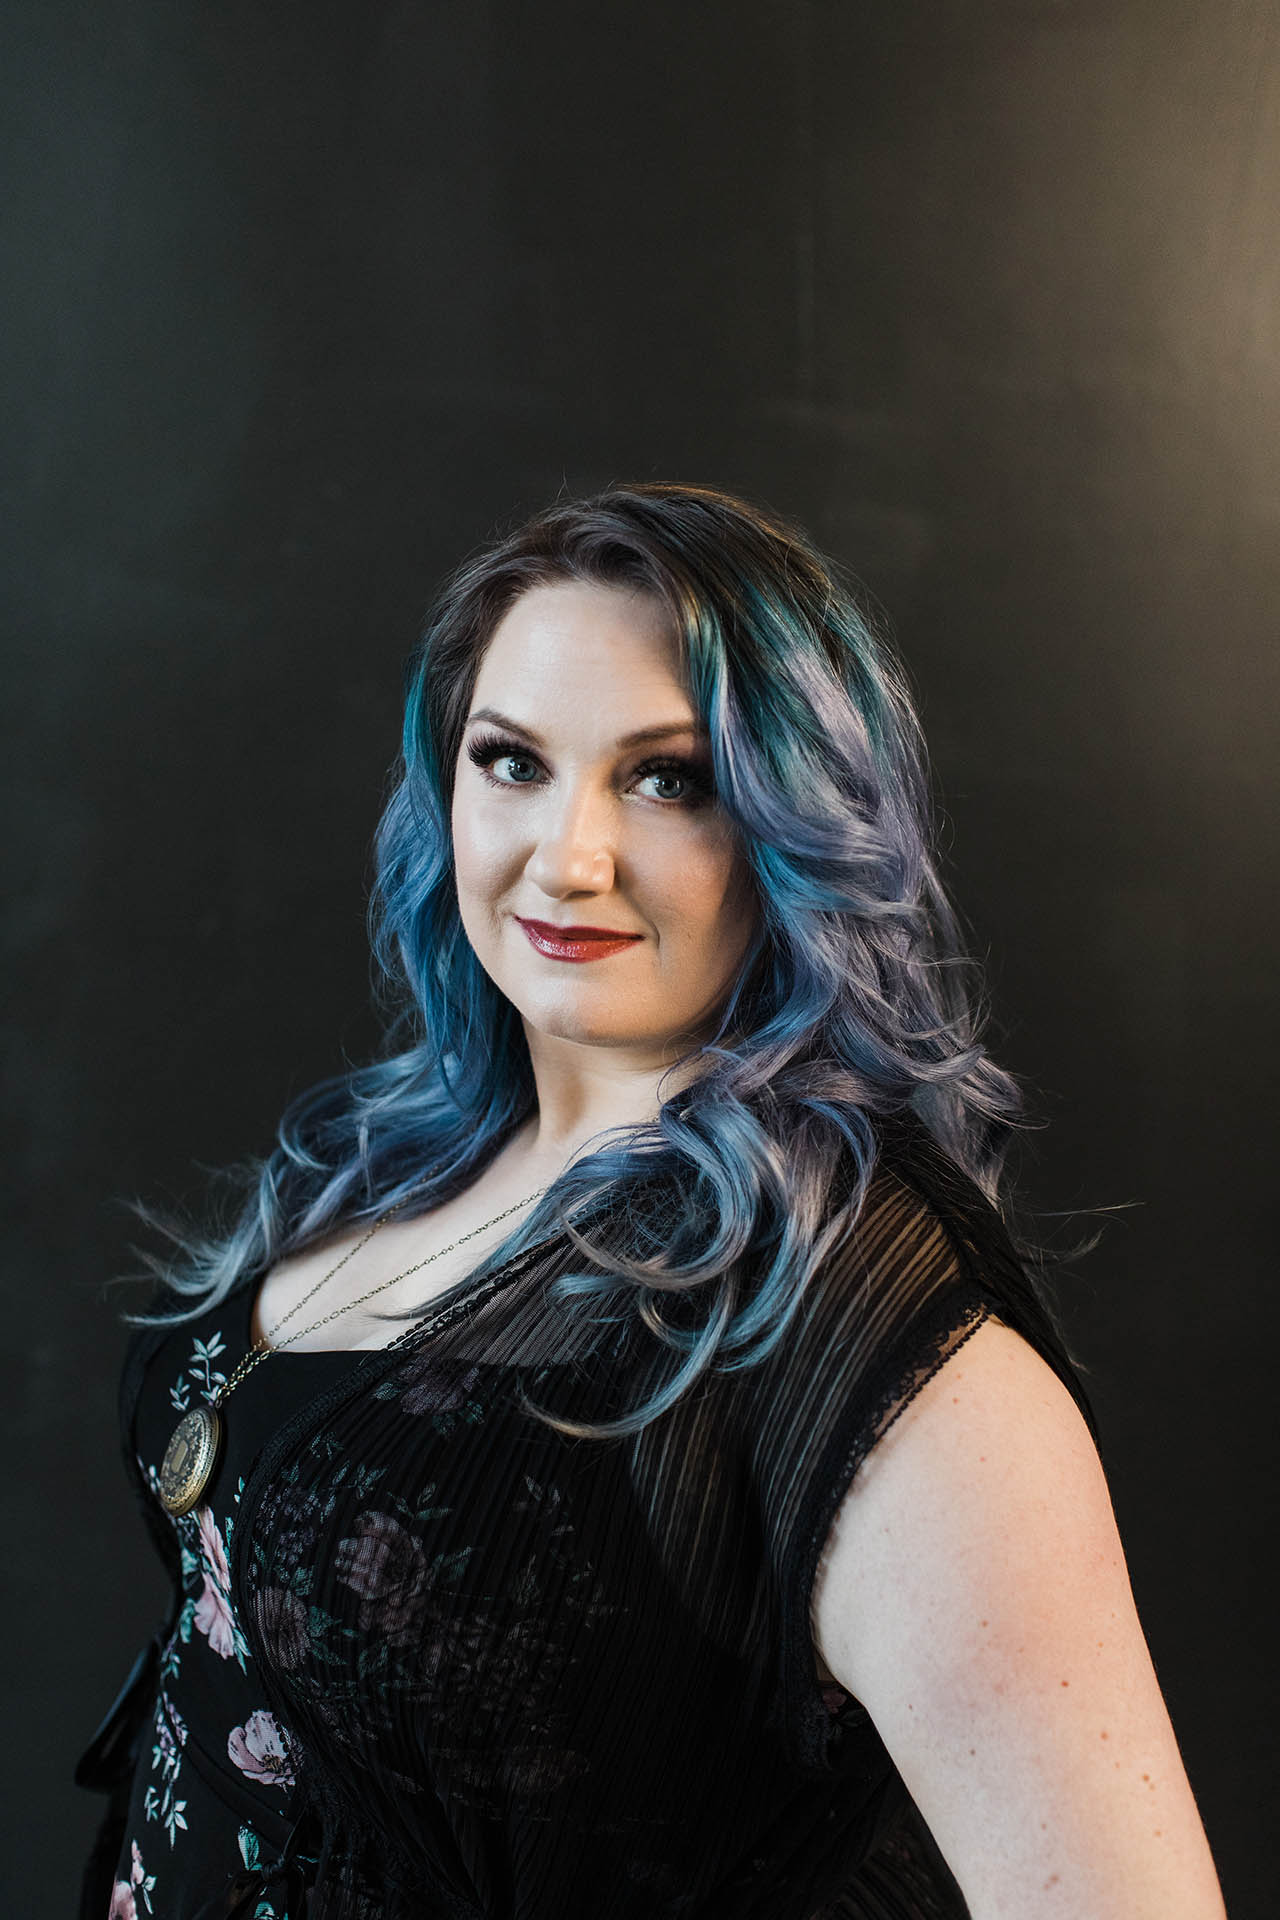 Head shot photographer Dallas; photo of a woman in a black top with colorful blue and purple hair smiling in front of a black backdrop.